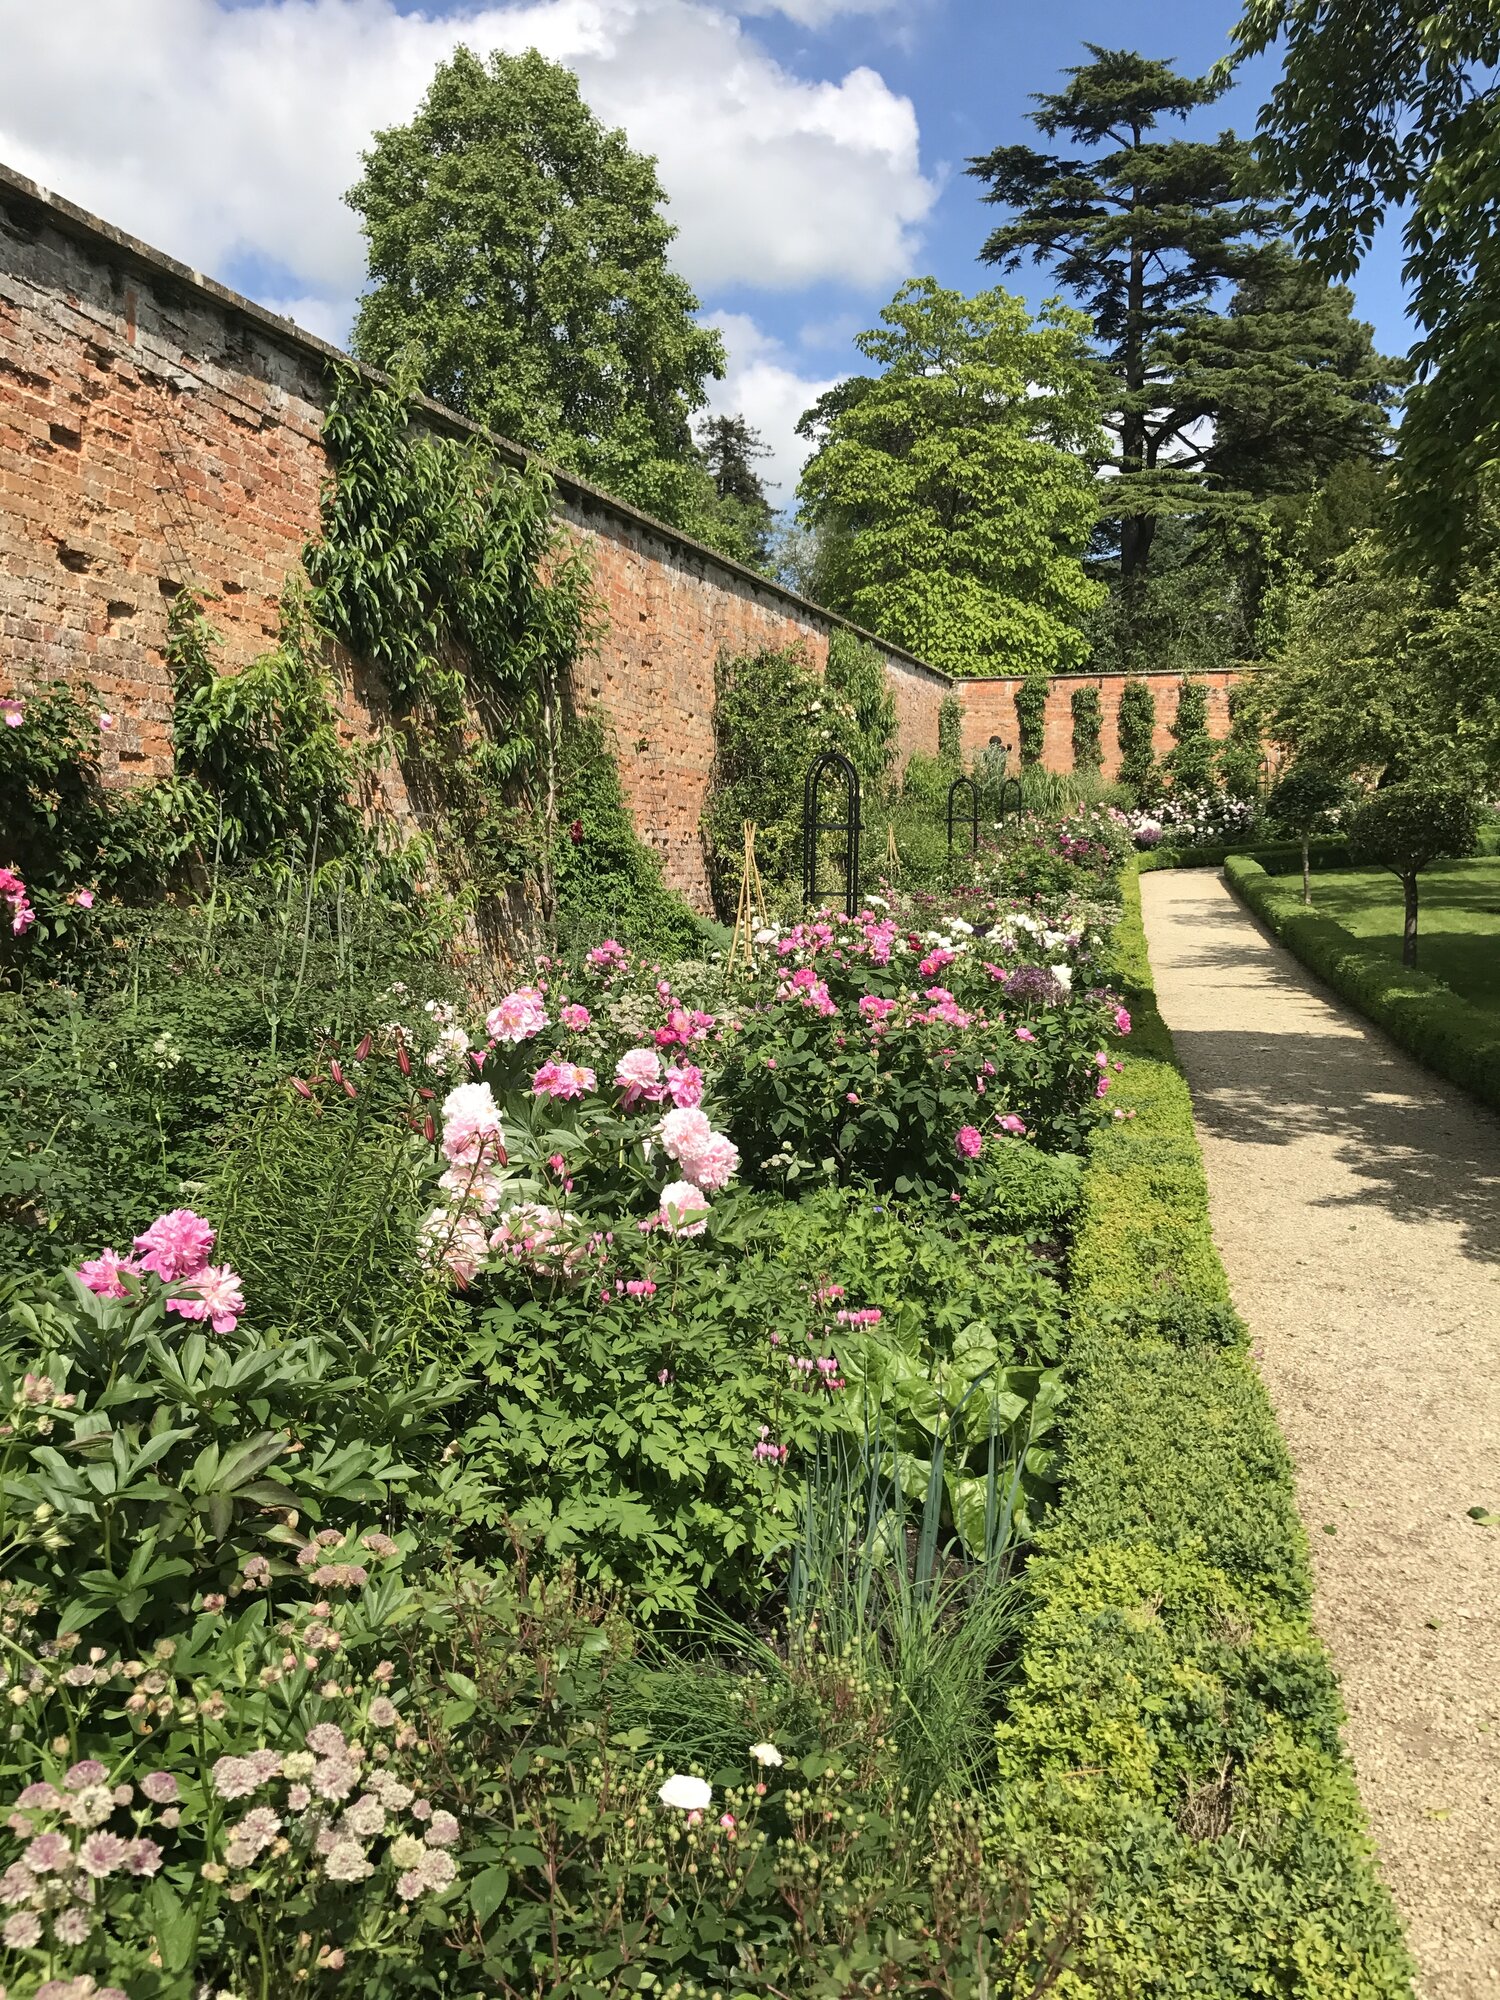 The herbaceous borders packed with blooms